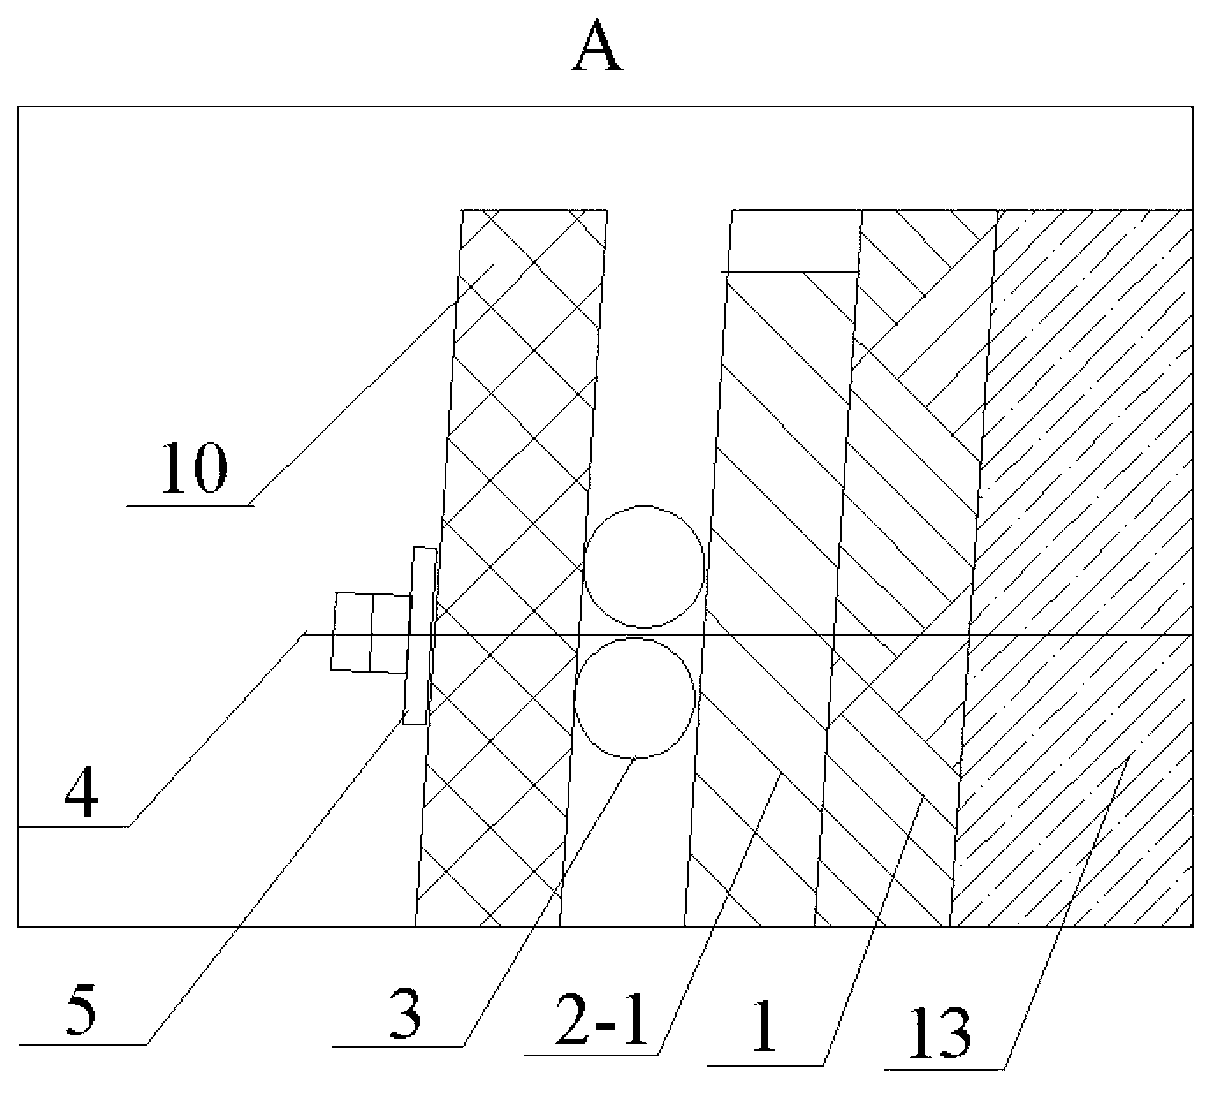 Construction method for one-time formation of concrete pool wall